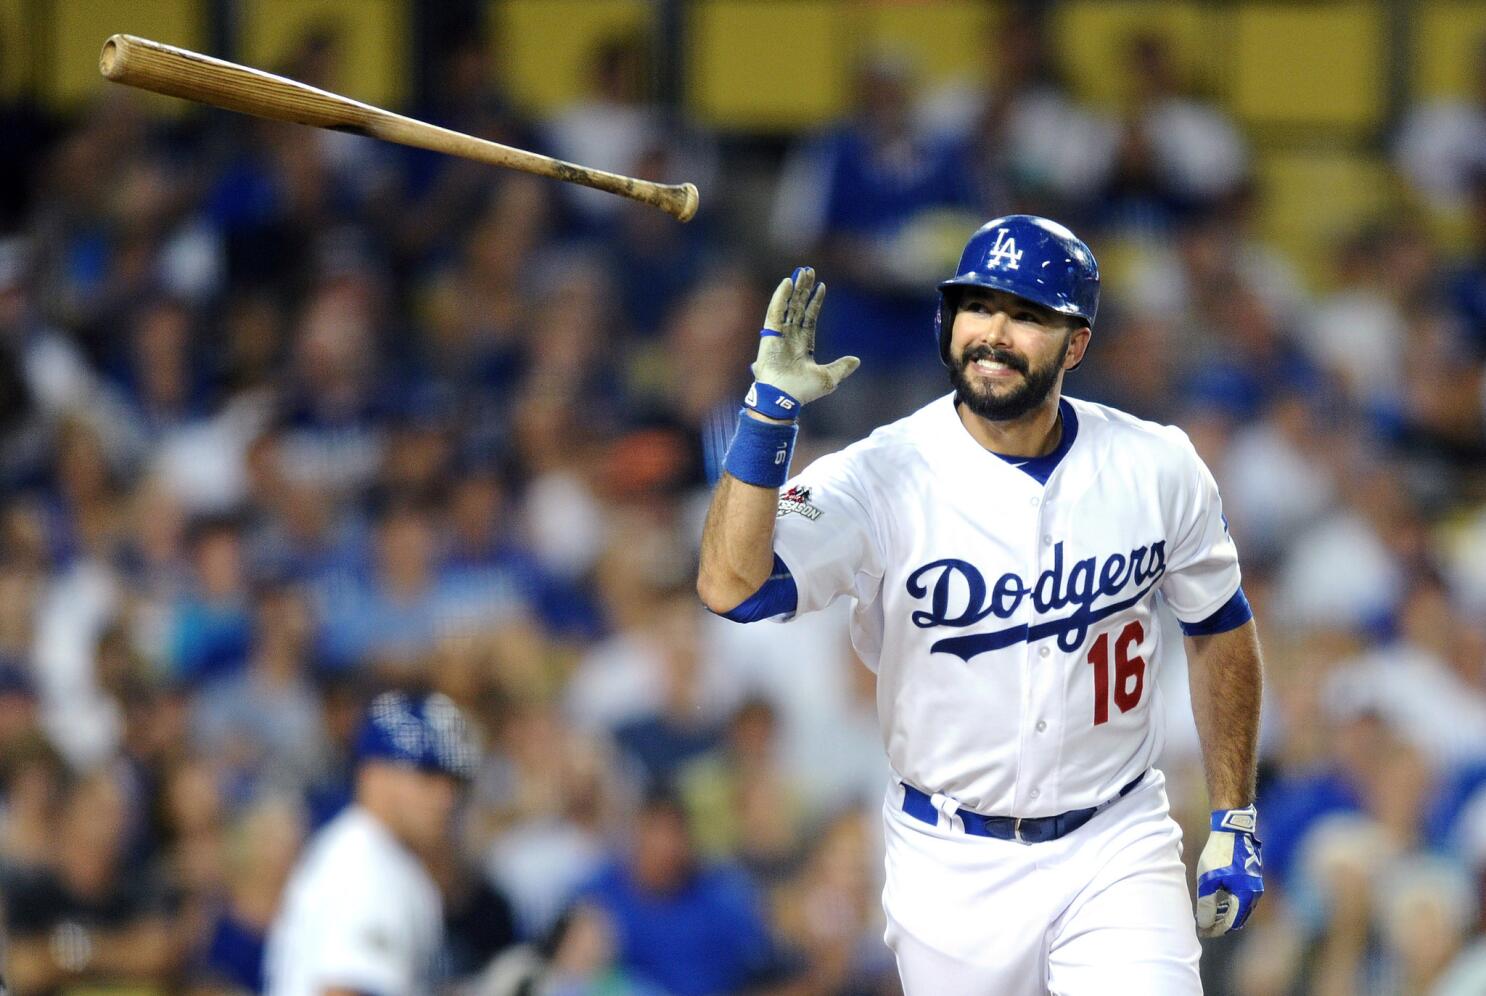 2022 MLB All-Star Week: Andre Ethier interview at Play Ball Park